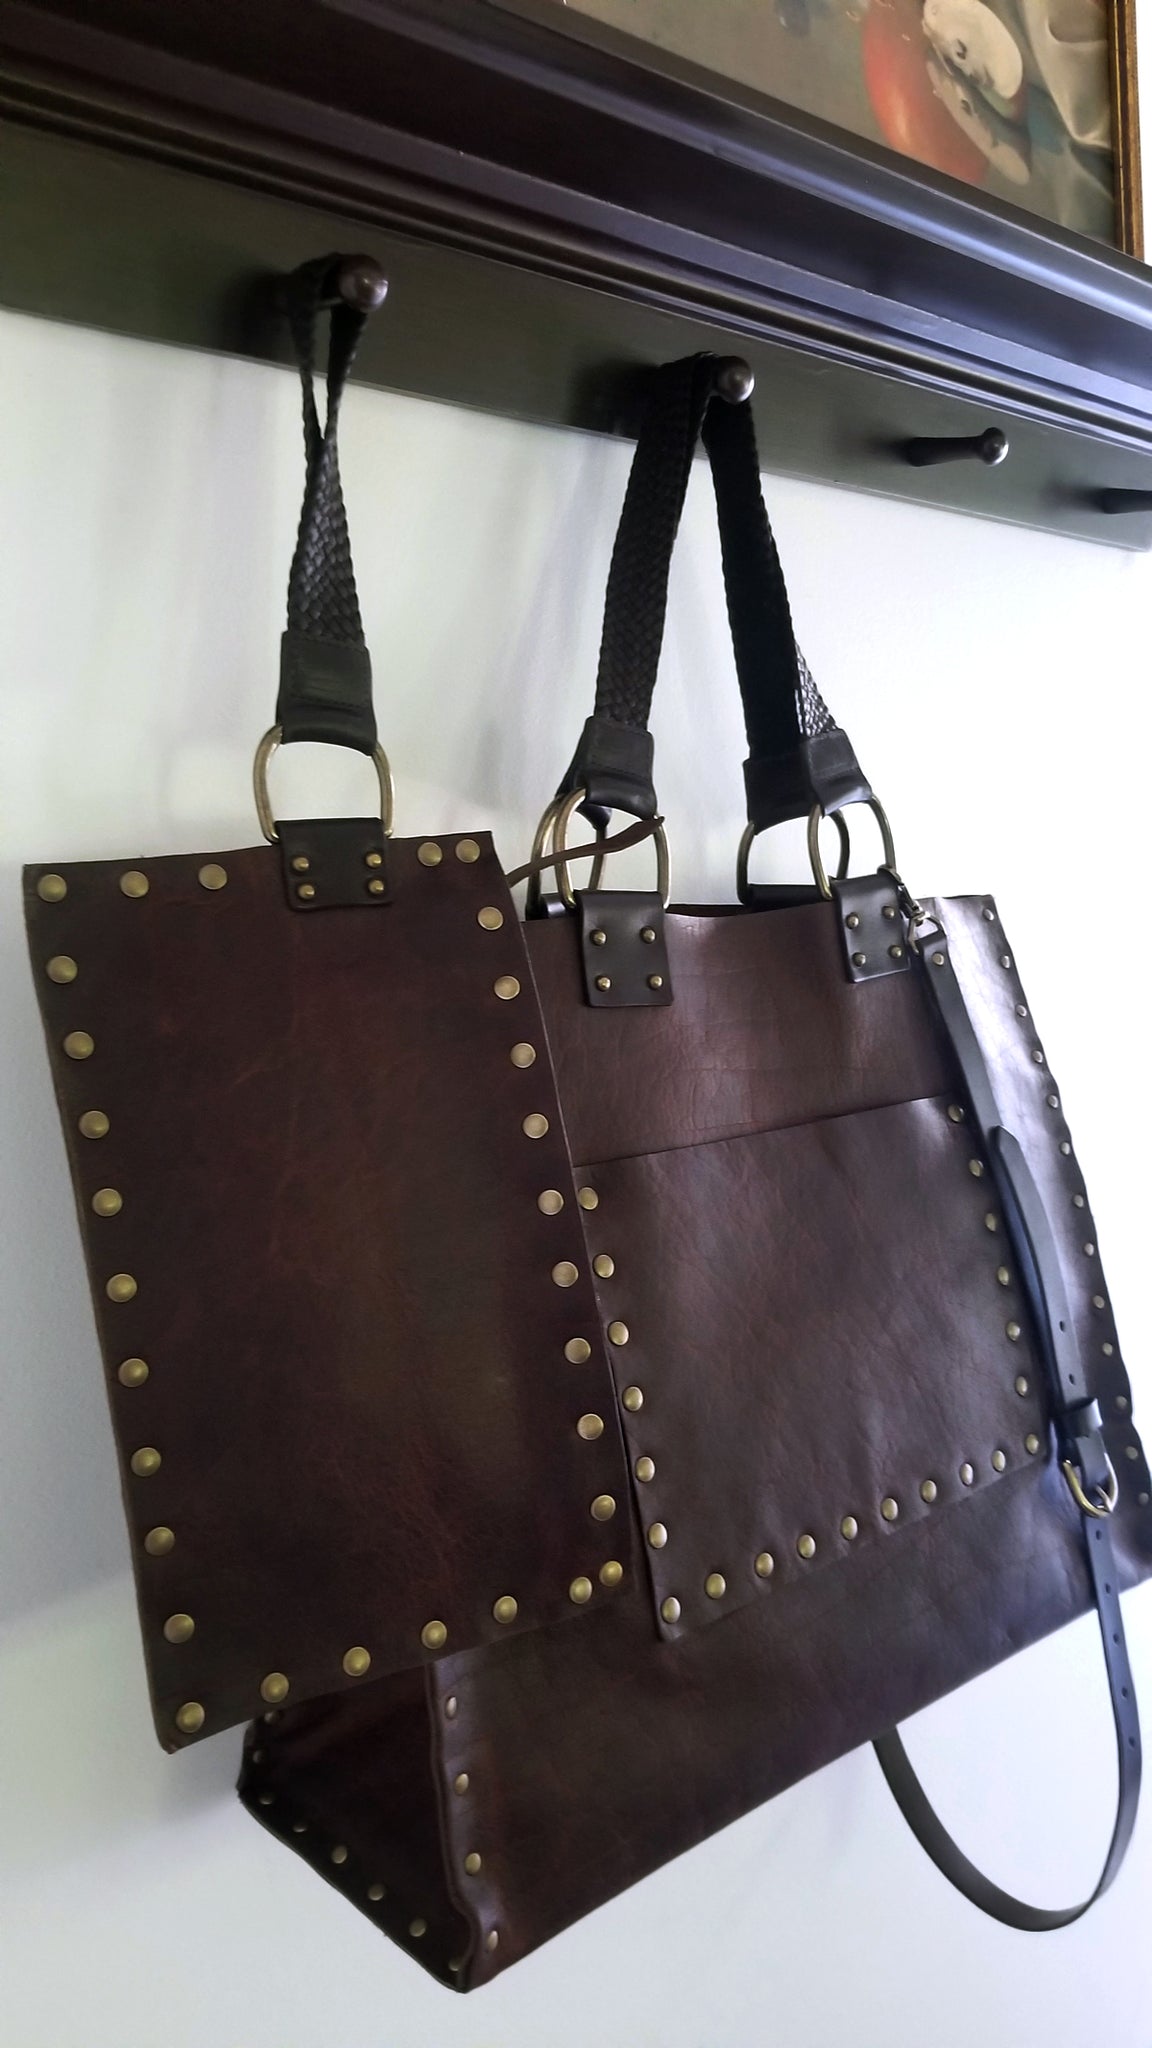 Pin on BAGS and leather goodies